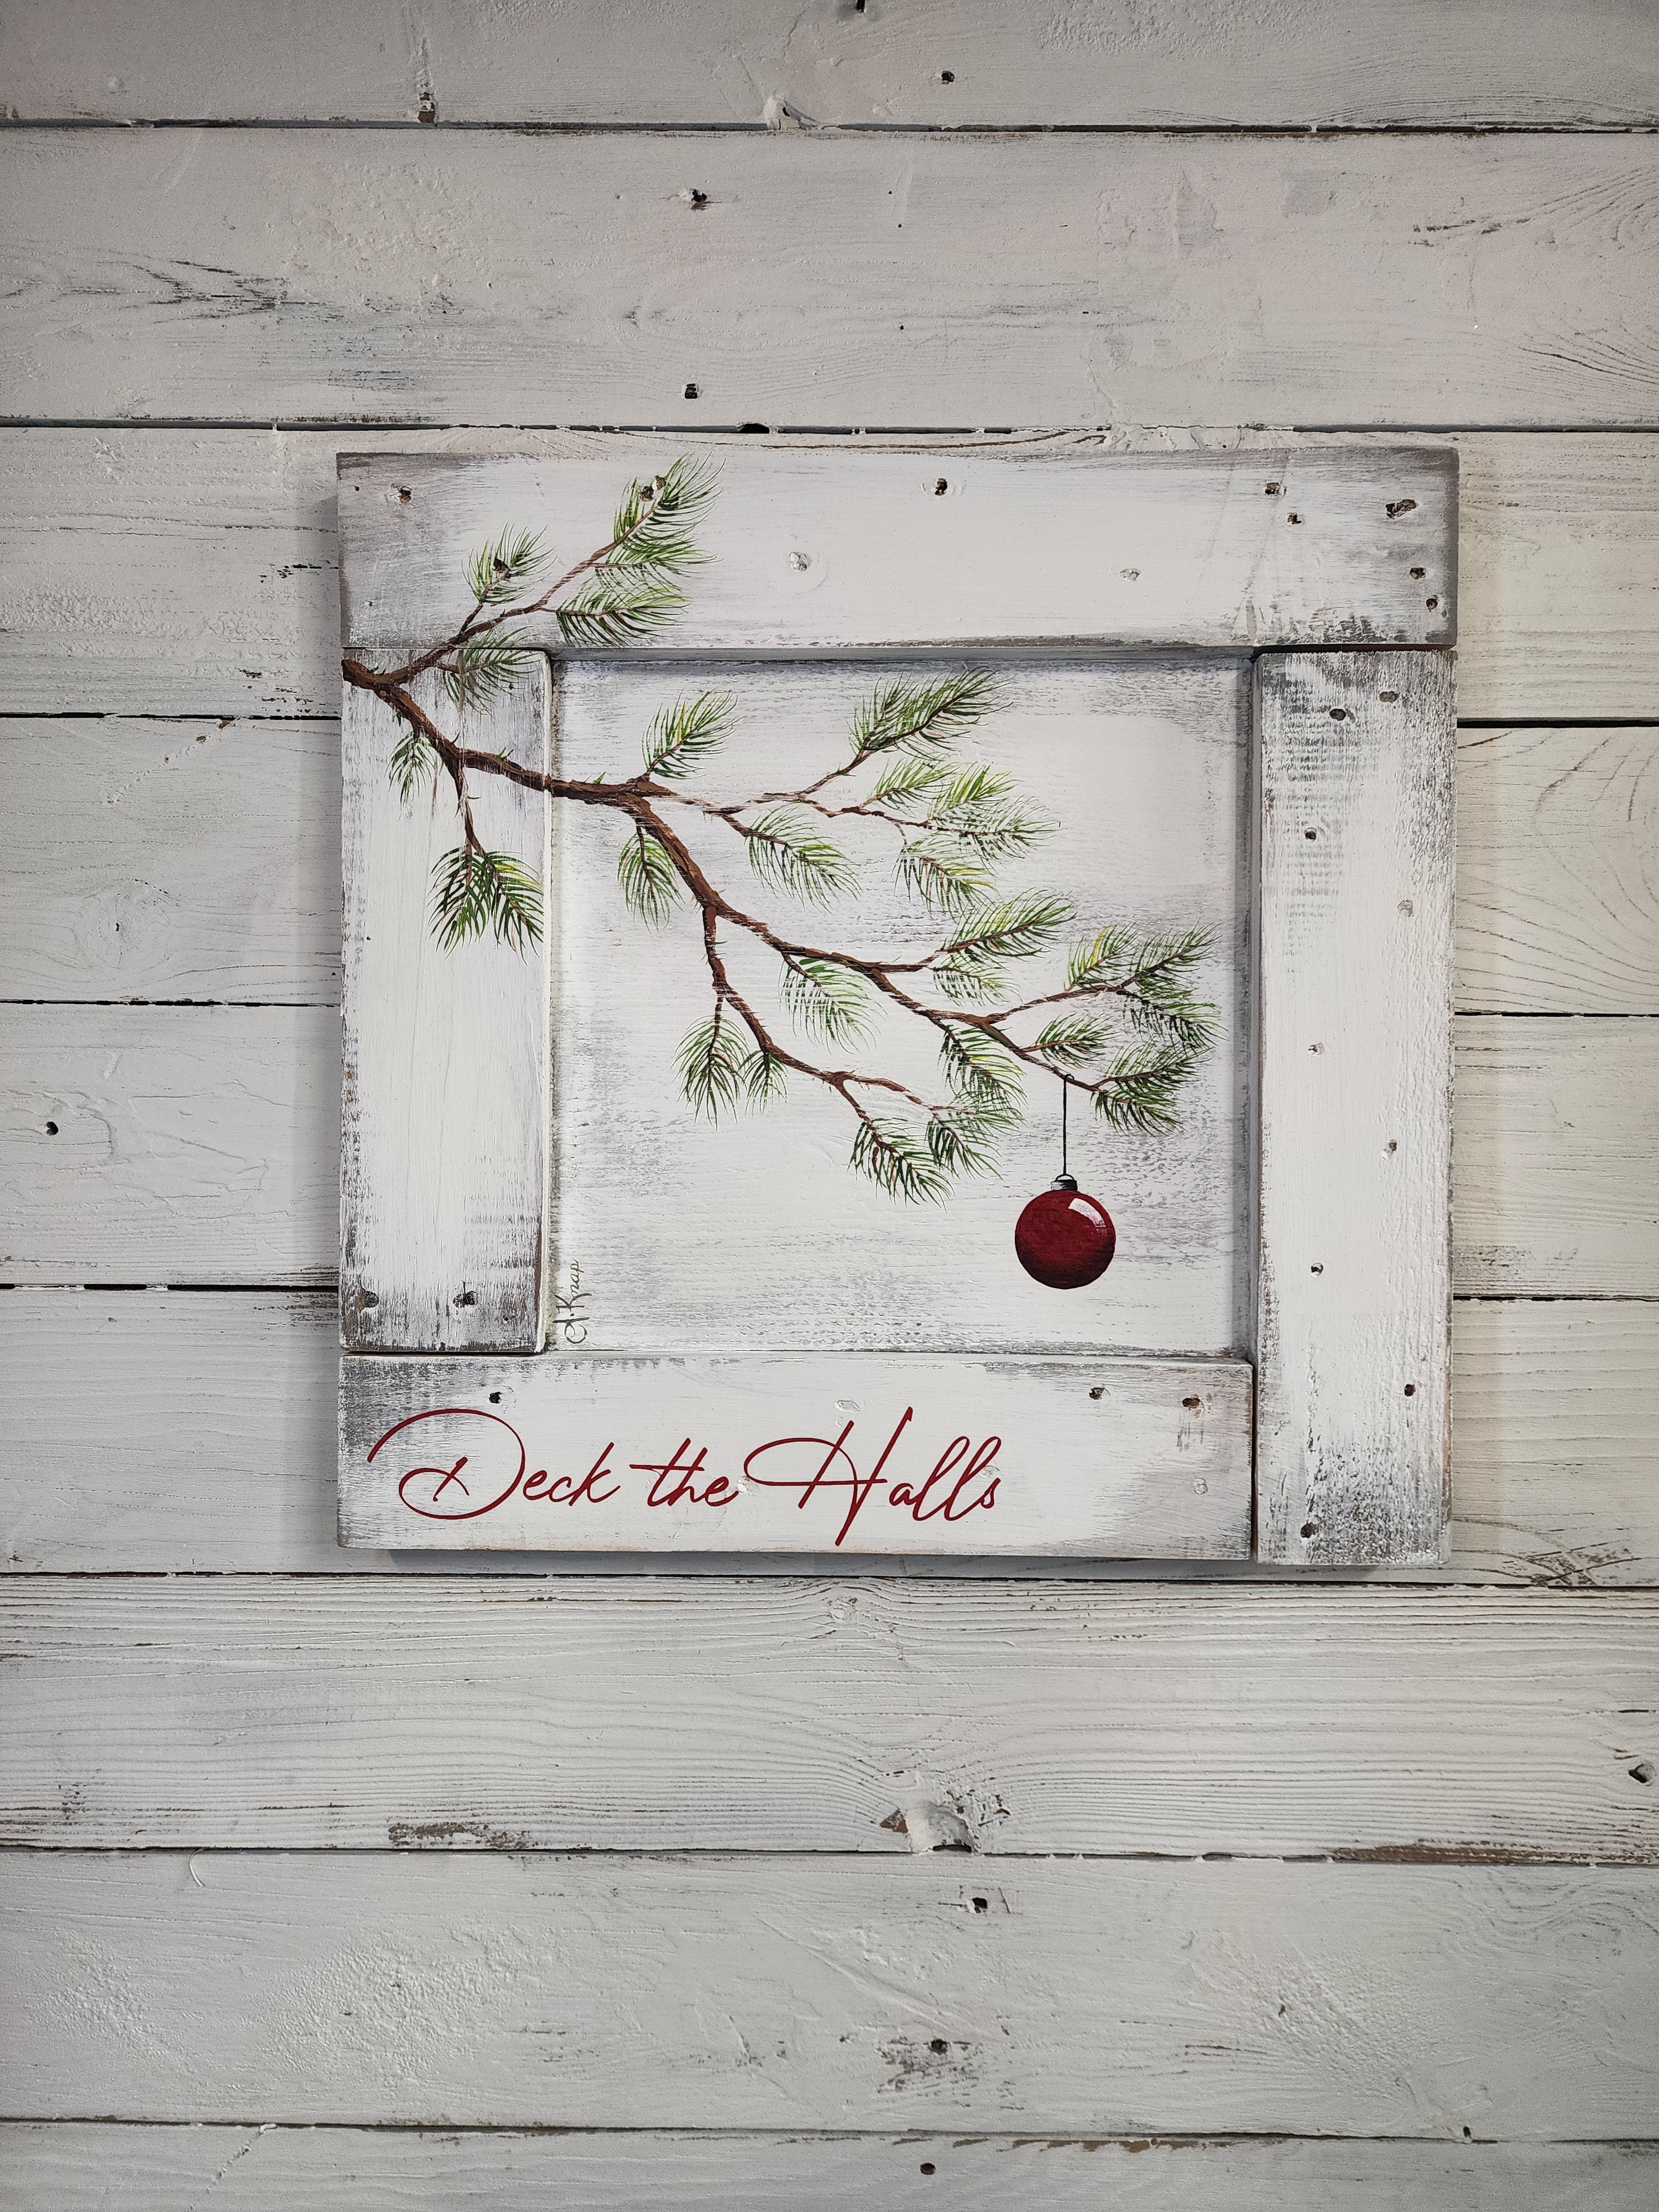 Christmas pine branches with red ornament, hand painted on whitewashed pallet wood, Deck the Halls, Christmas rustic farmhouse decor